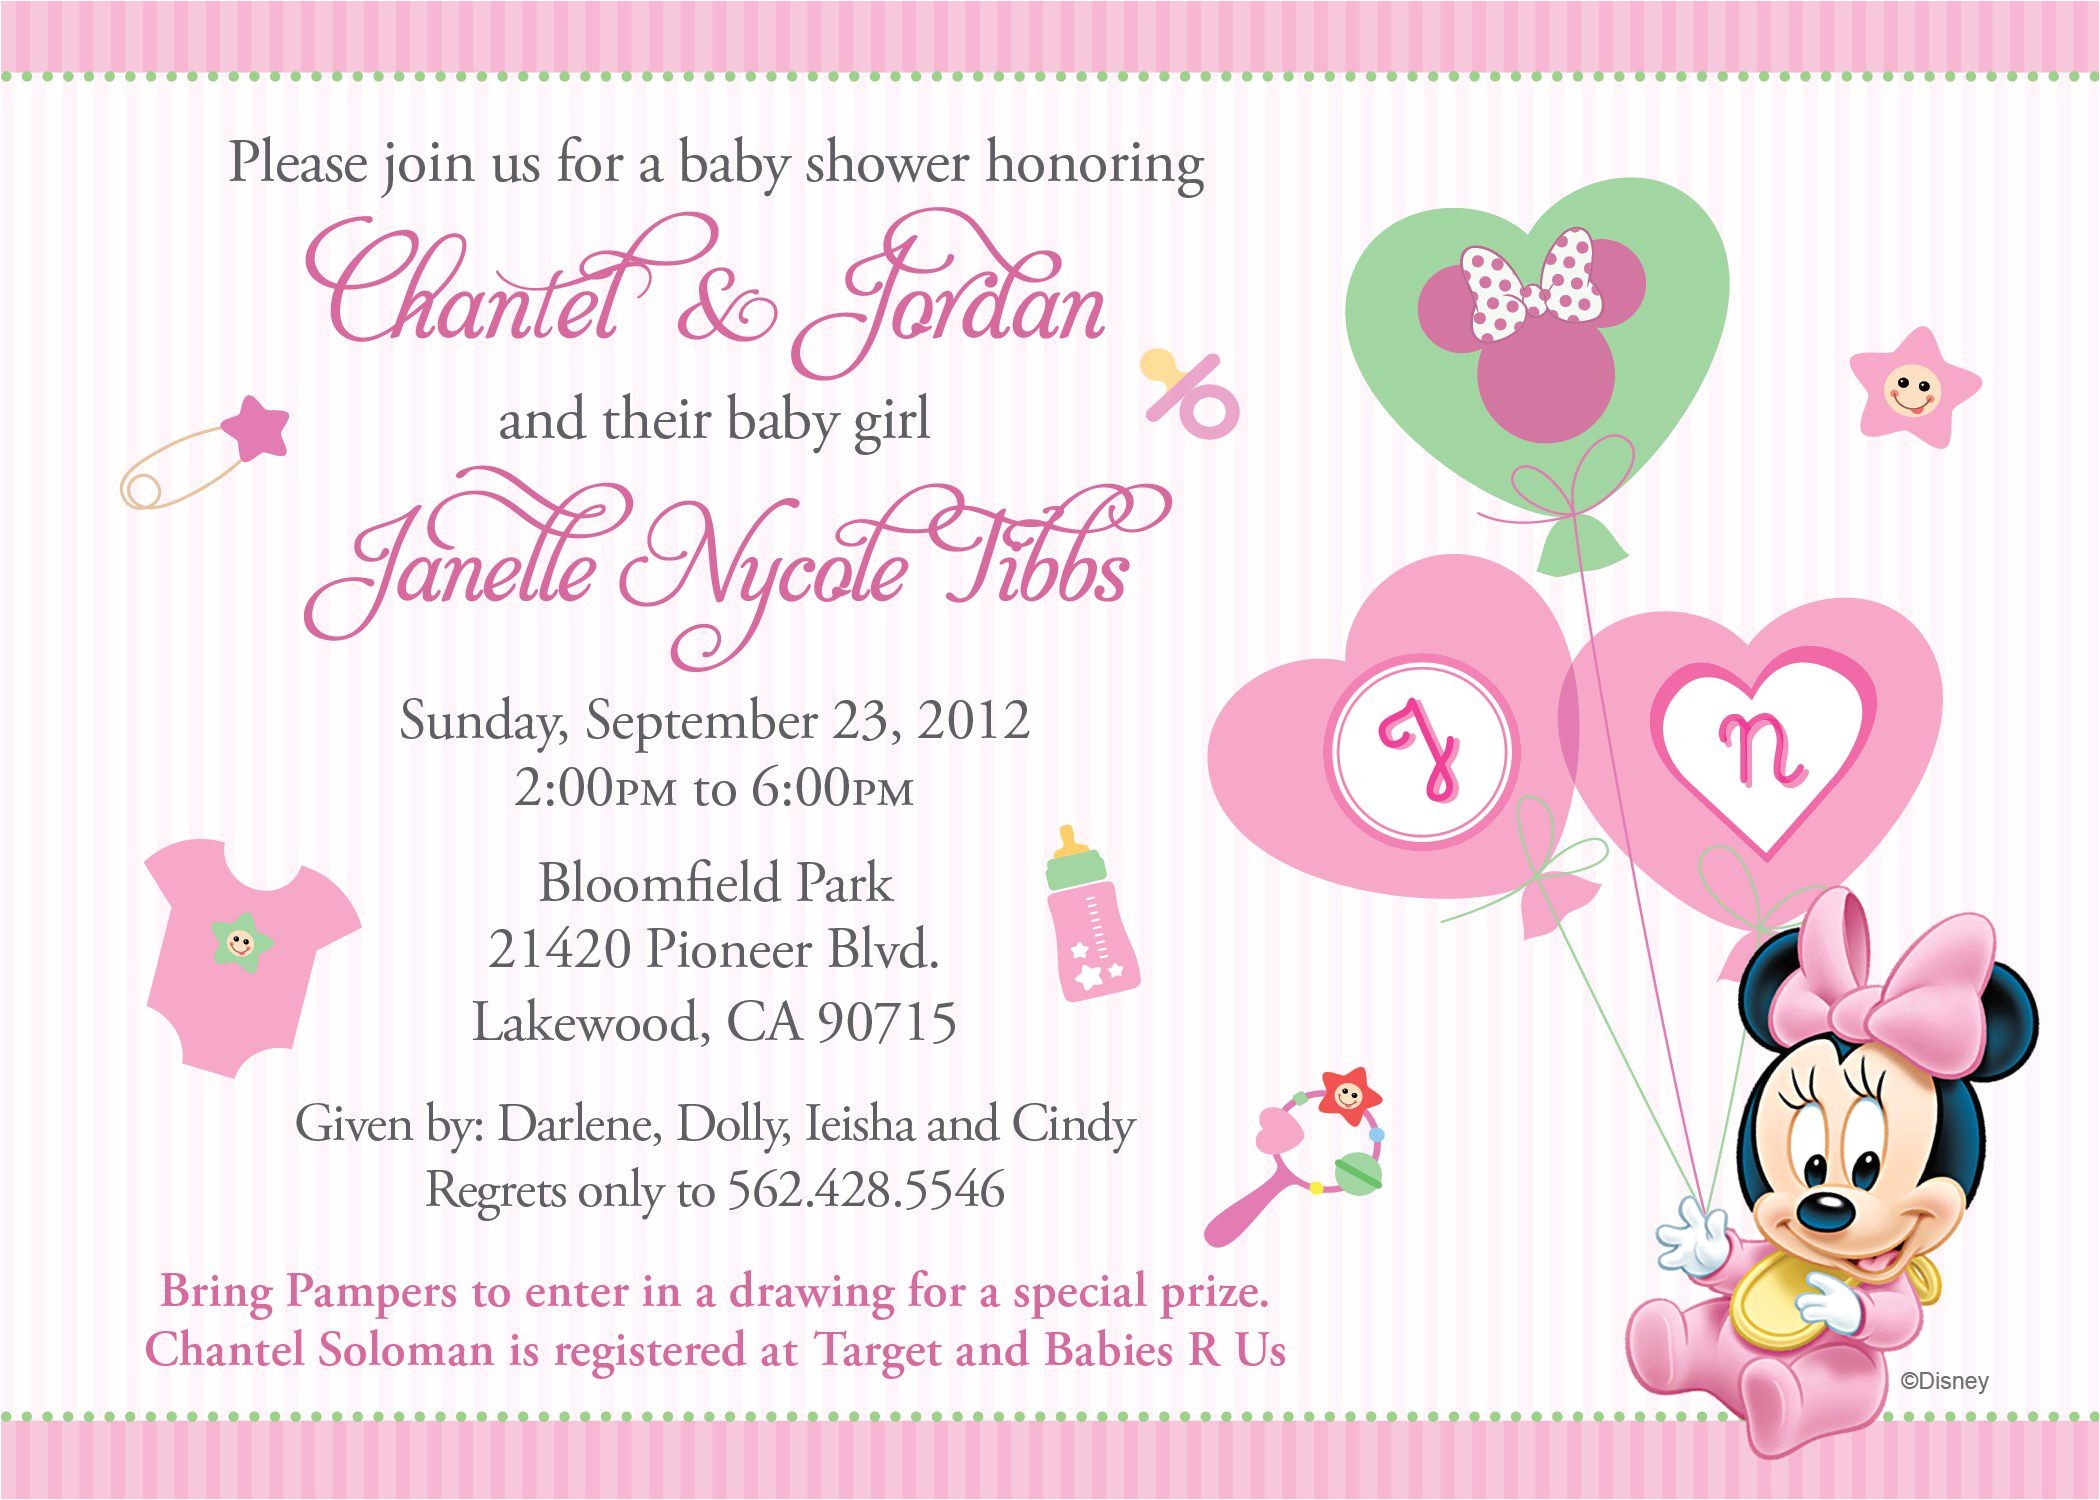 Baby Shower Invitation Text Template Baby Shower Invitation Free Baby Shower Invitation